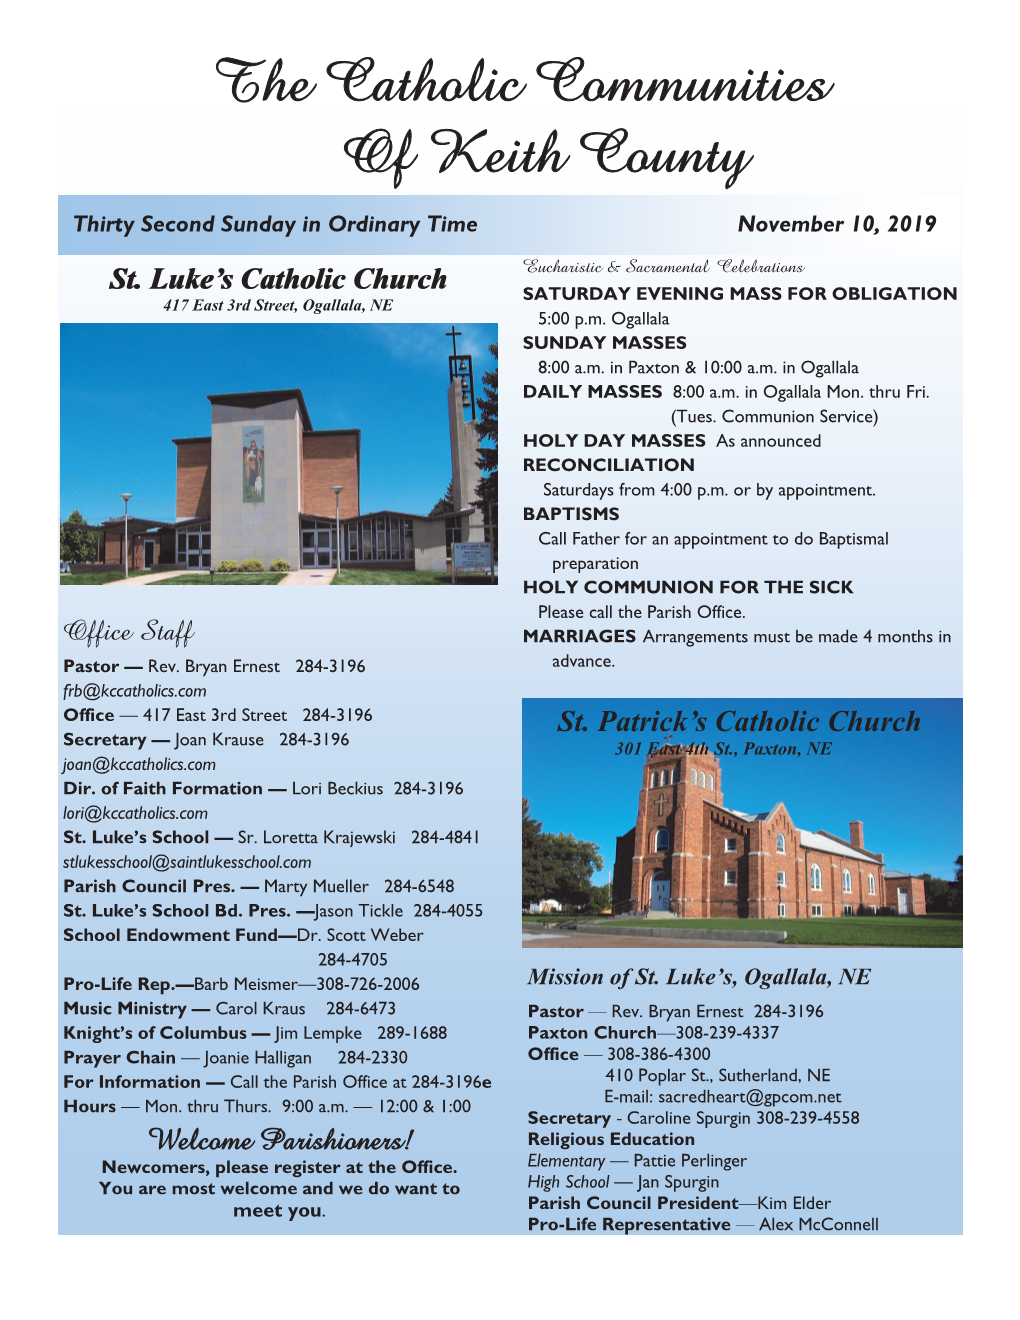 The Catholic Communities of Keith County